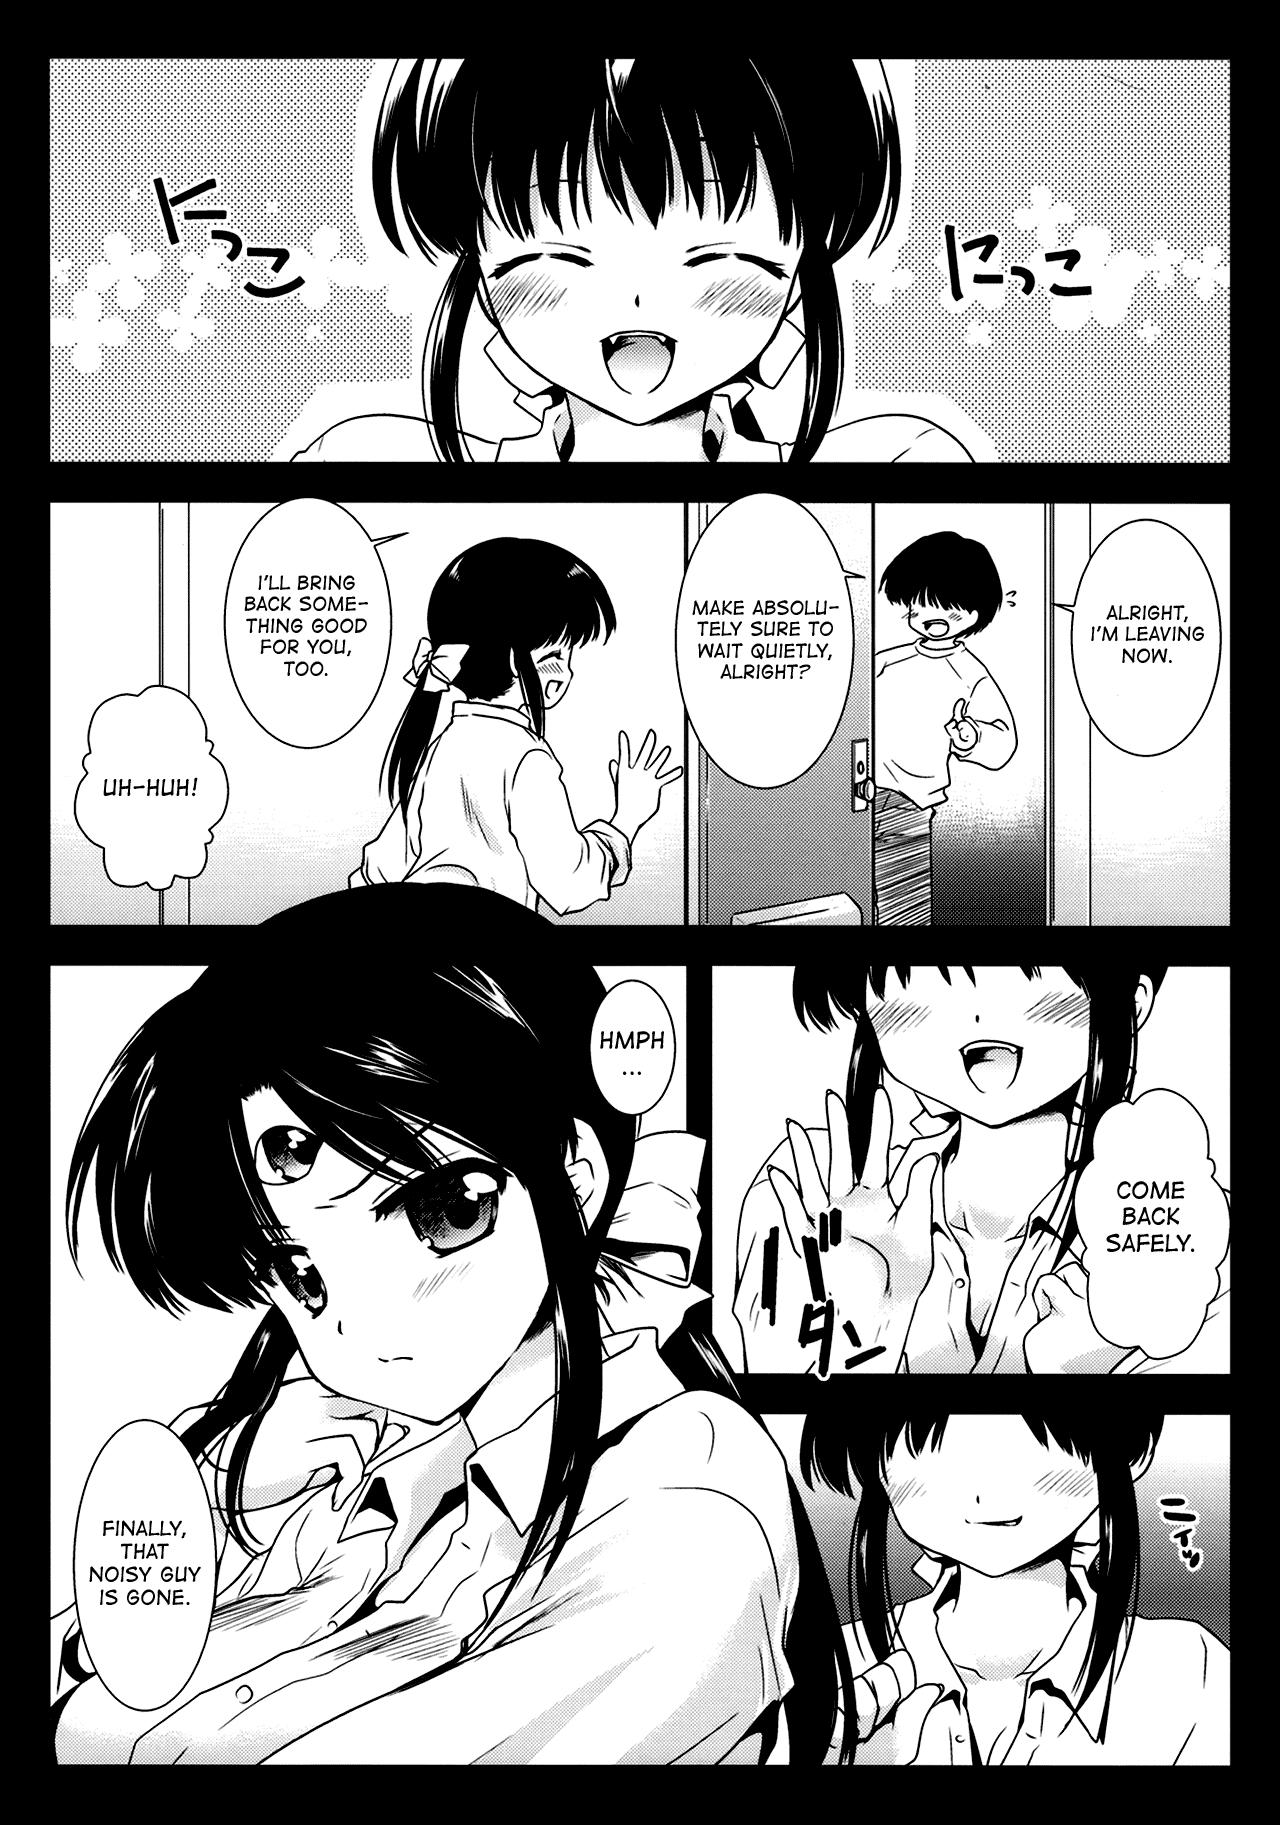 Fingers Seima Kyuuin - 3x3 eyes Solo - Page 5